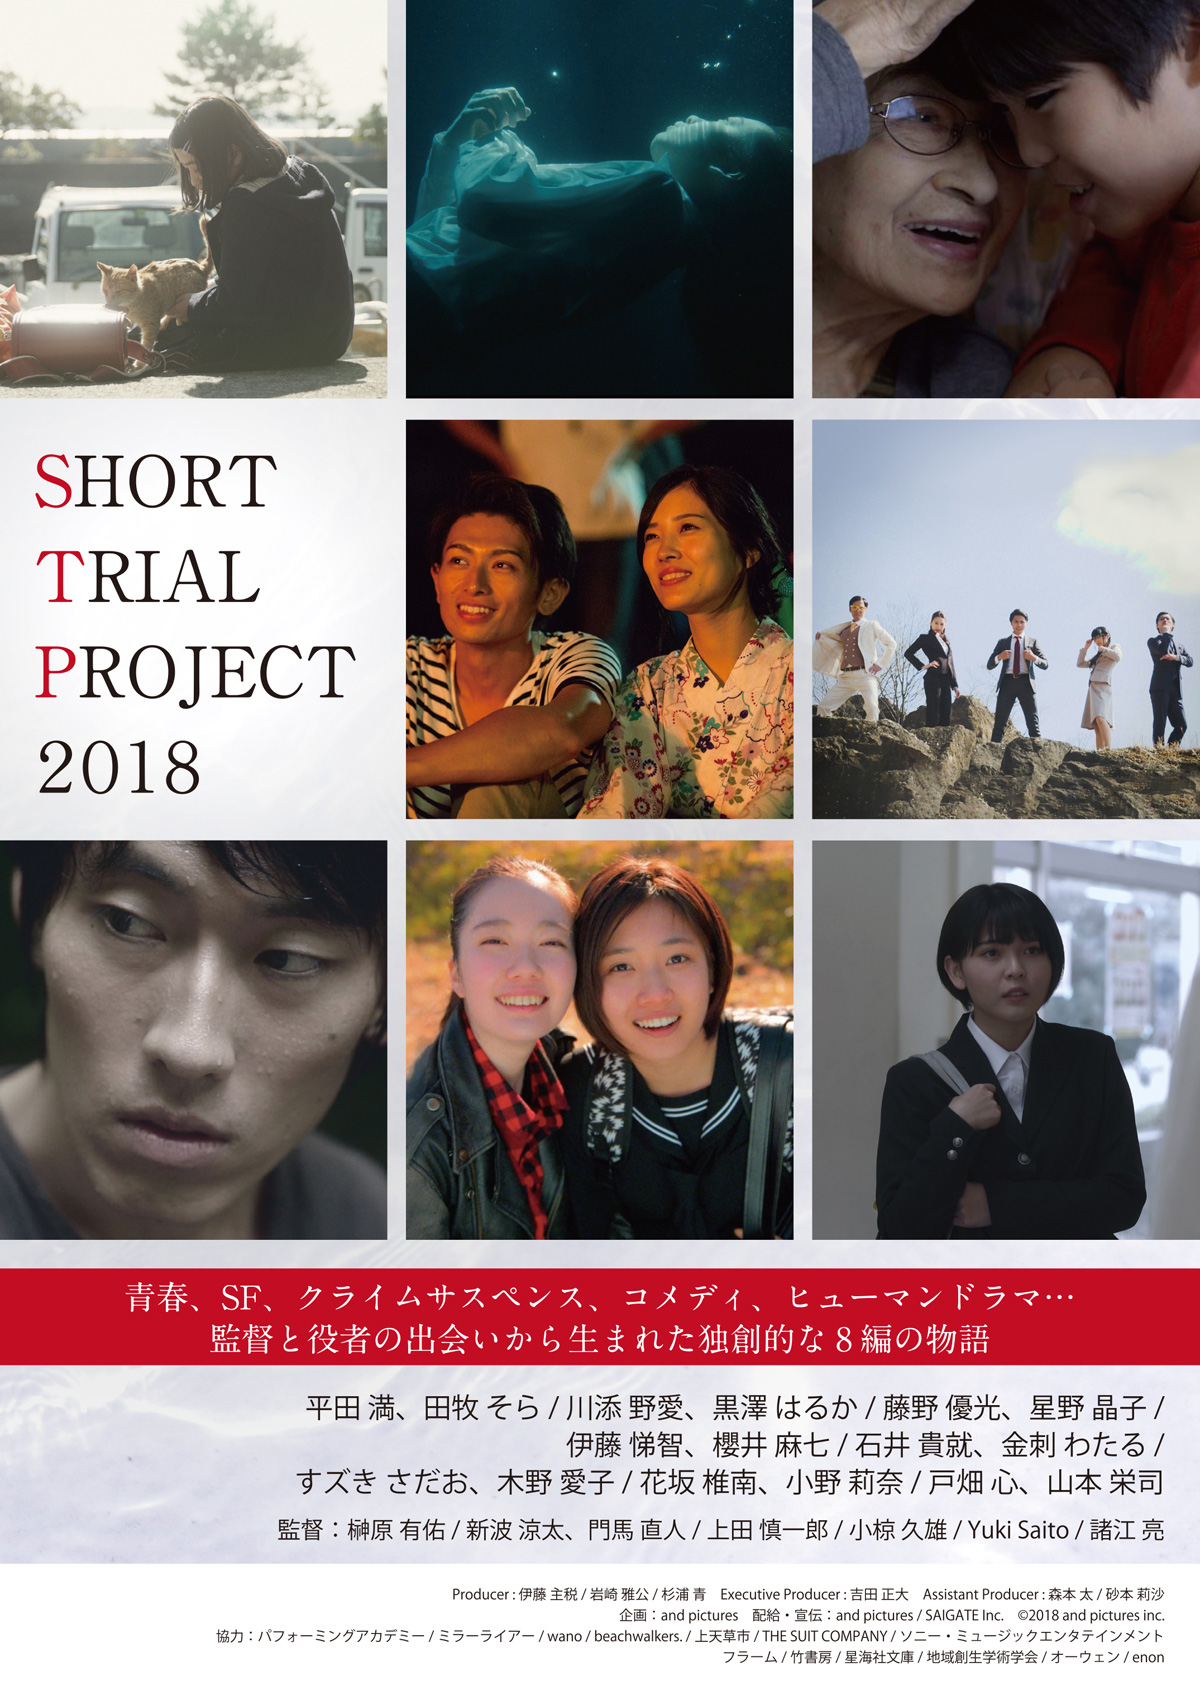 Short Trial Project 2018の画像